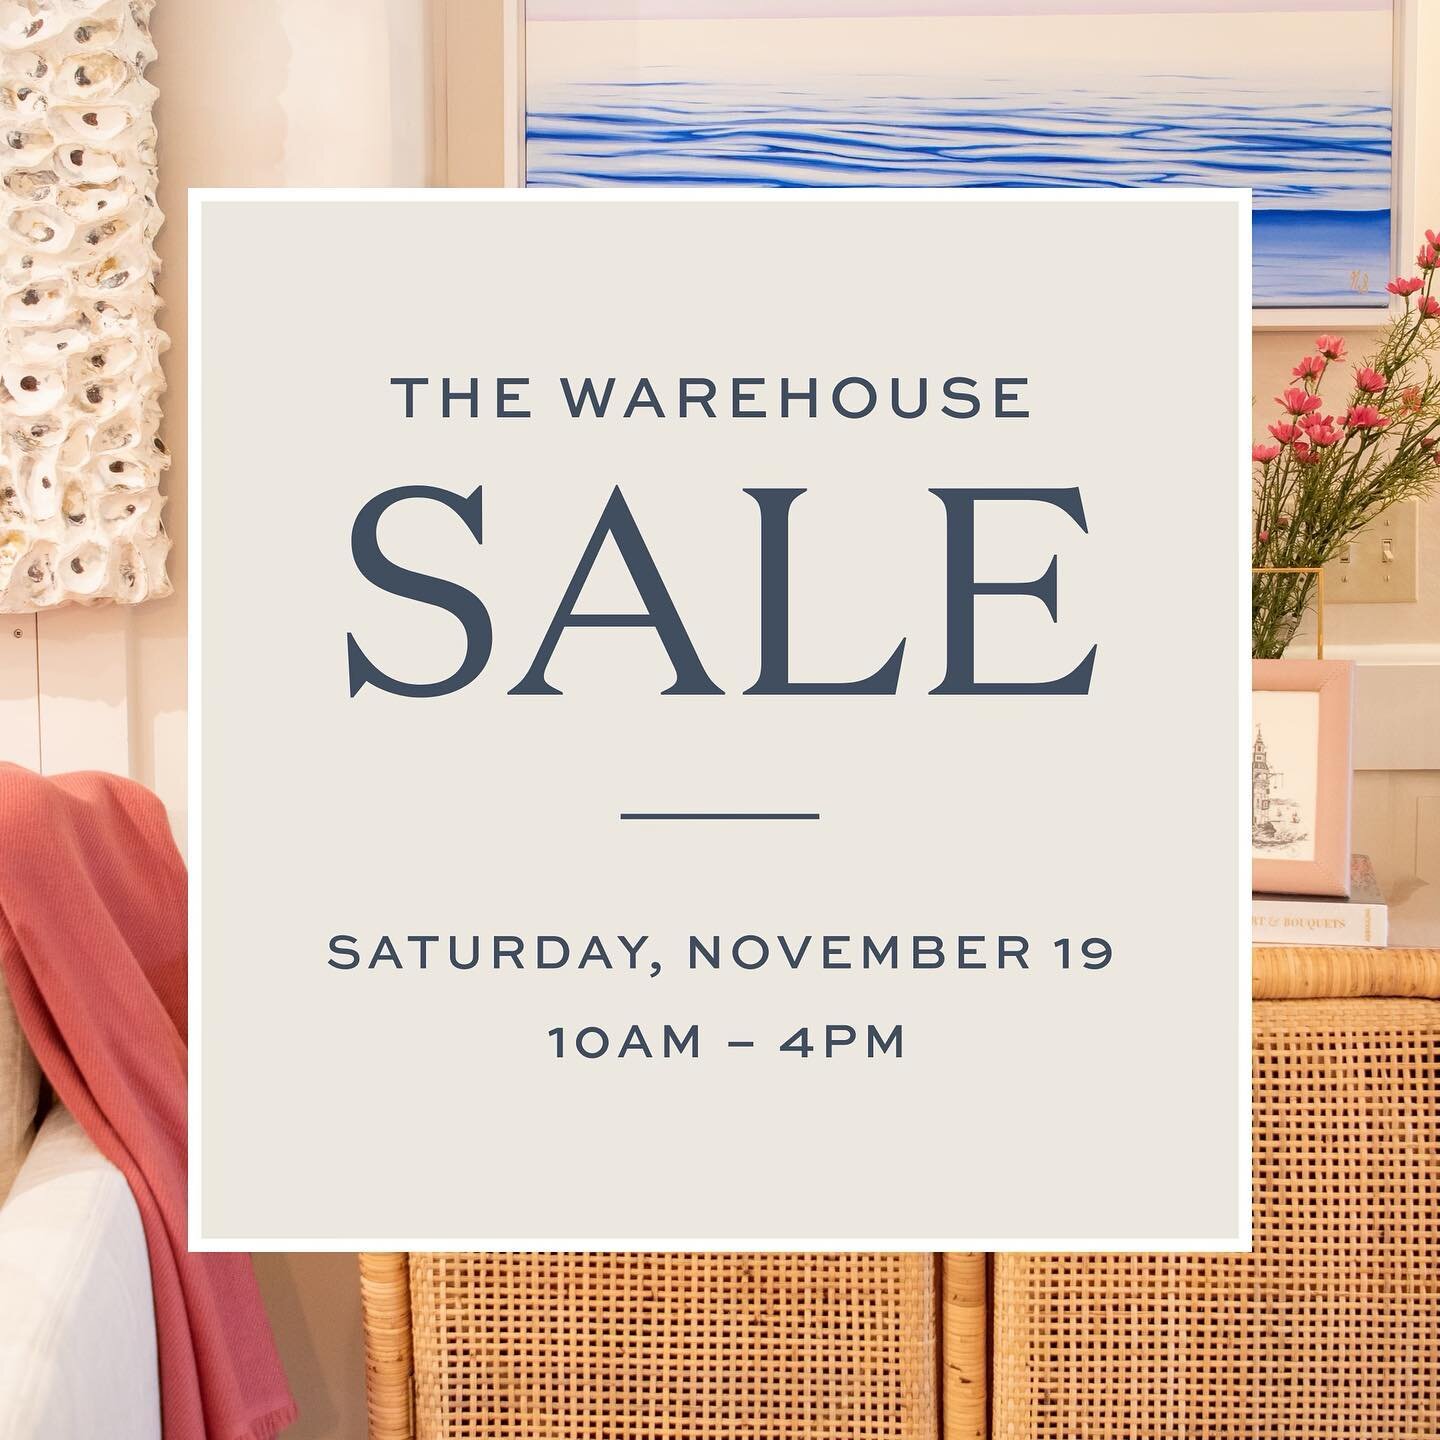 Don&rsquo;t miss out on our one day annual sale at our warehouse location! BYOT ( bring your own truck). First come first serve. Larger items can be scheduled for delivery for additional fee. Come to the warehouse Saturday the 19th! Don&rsquo;t miss 